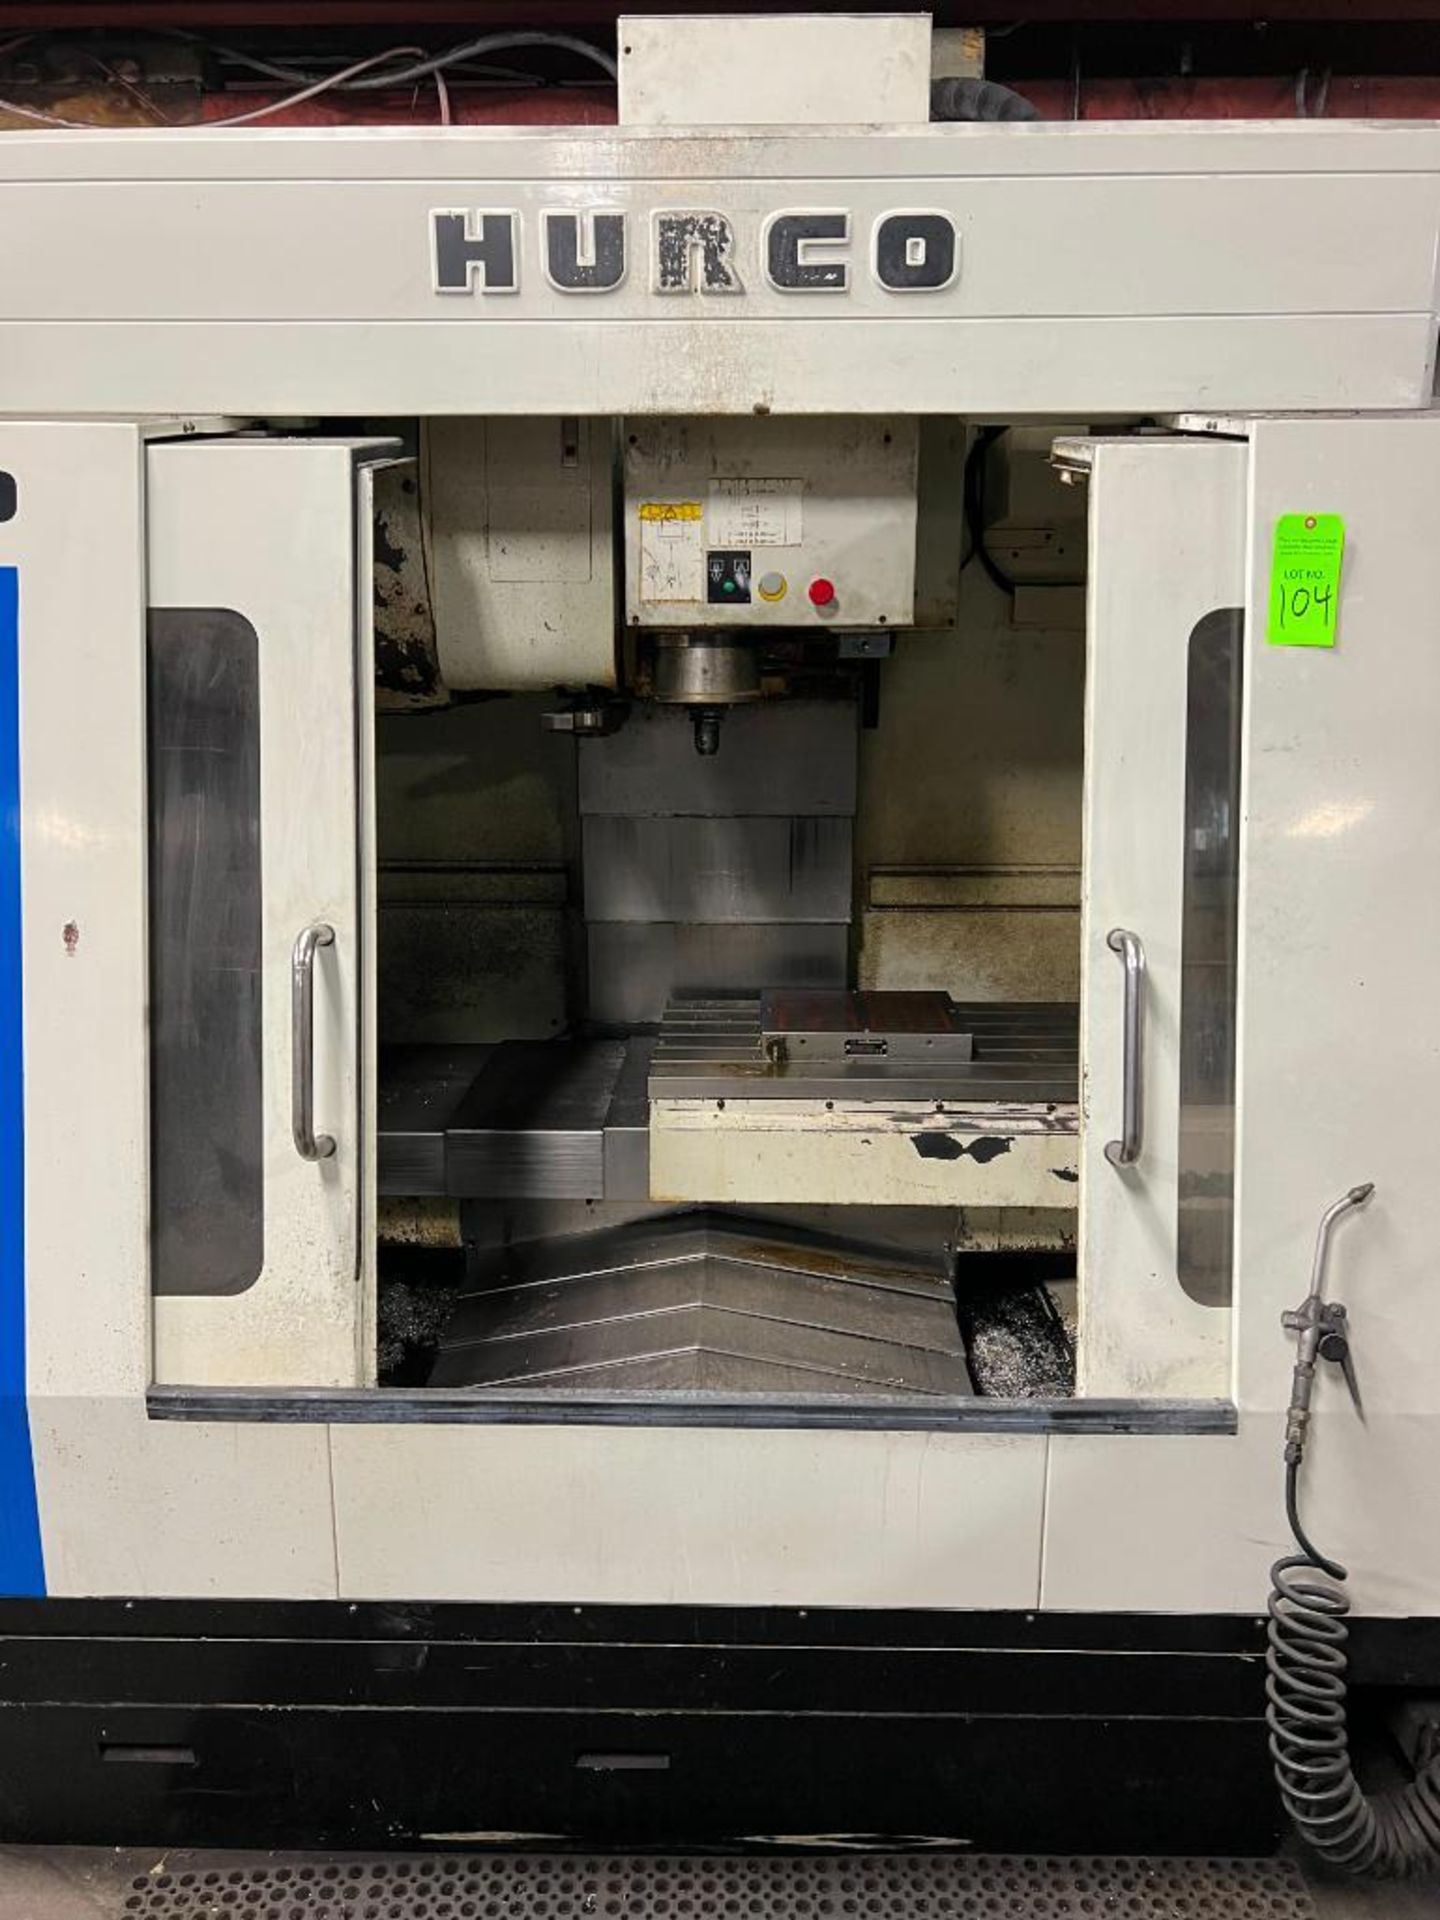 2005 Hurco VMX 42S 3-Axis Cnc Mill Vertical Machining Center - Image 3 of 11